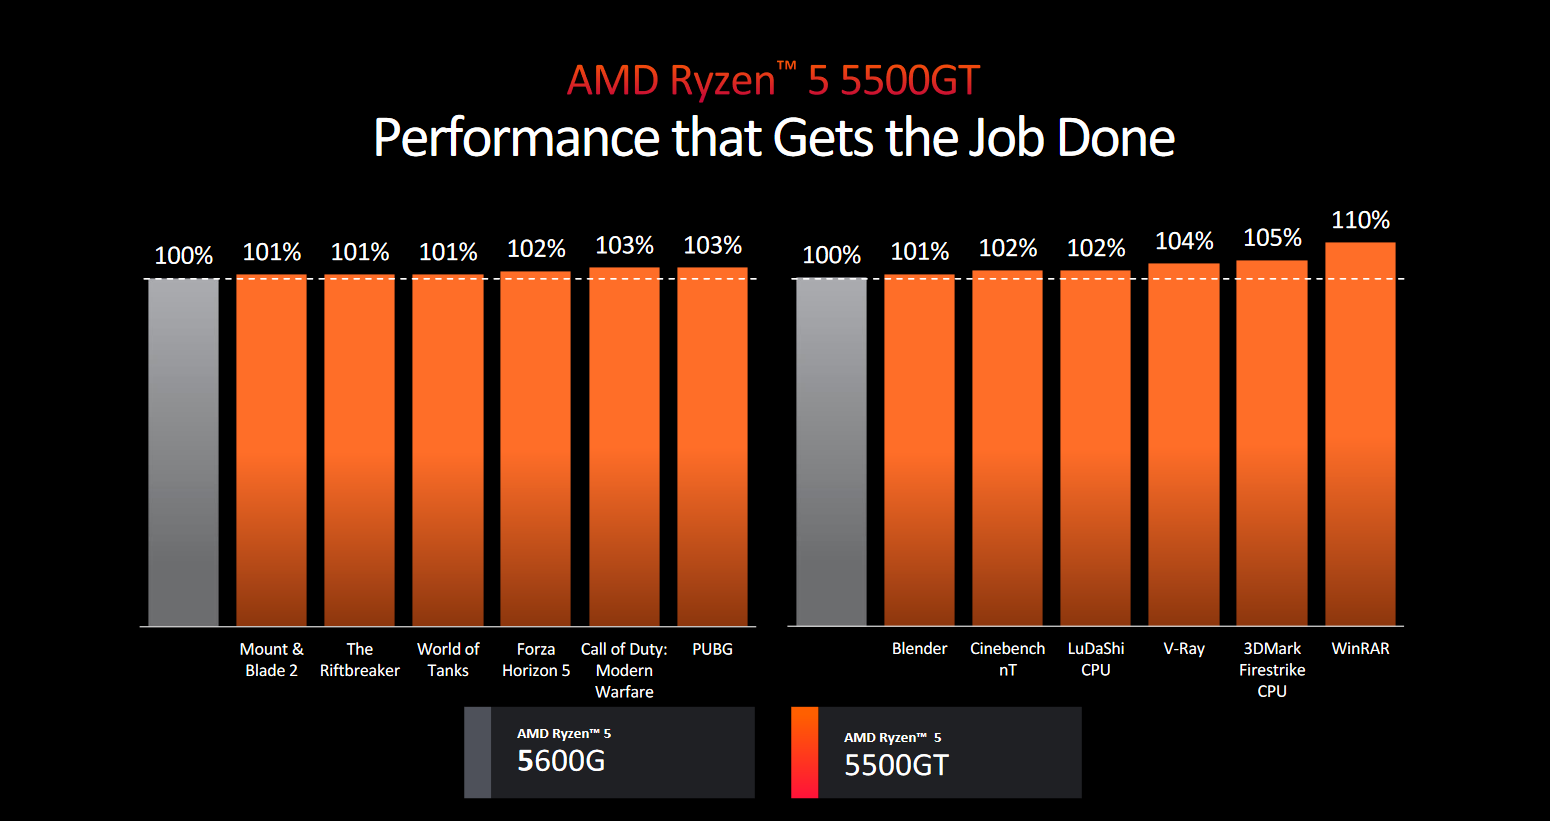 AMD Ryzen 5 5500 Complete review with benchmarks